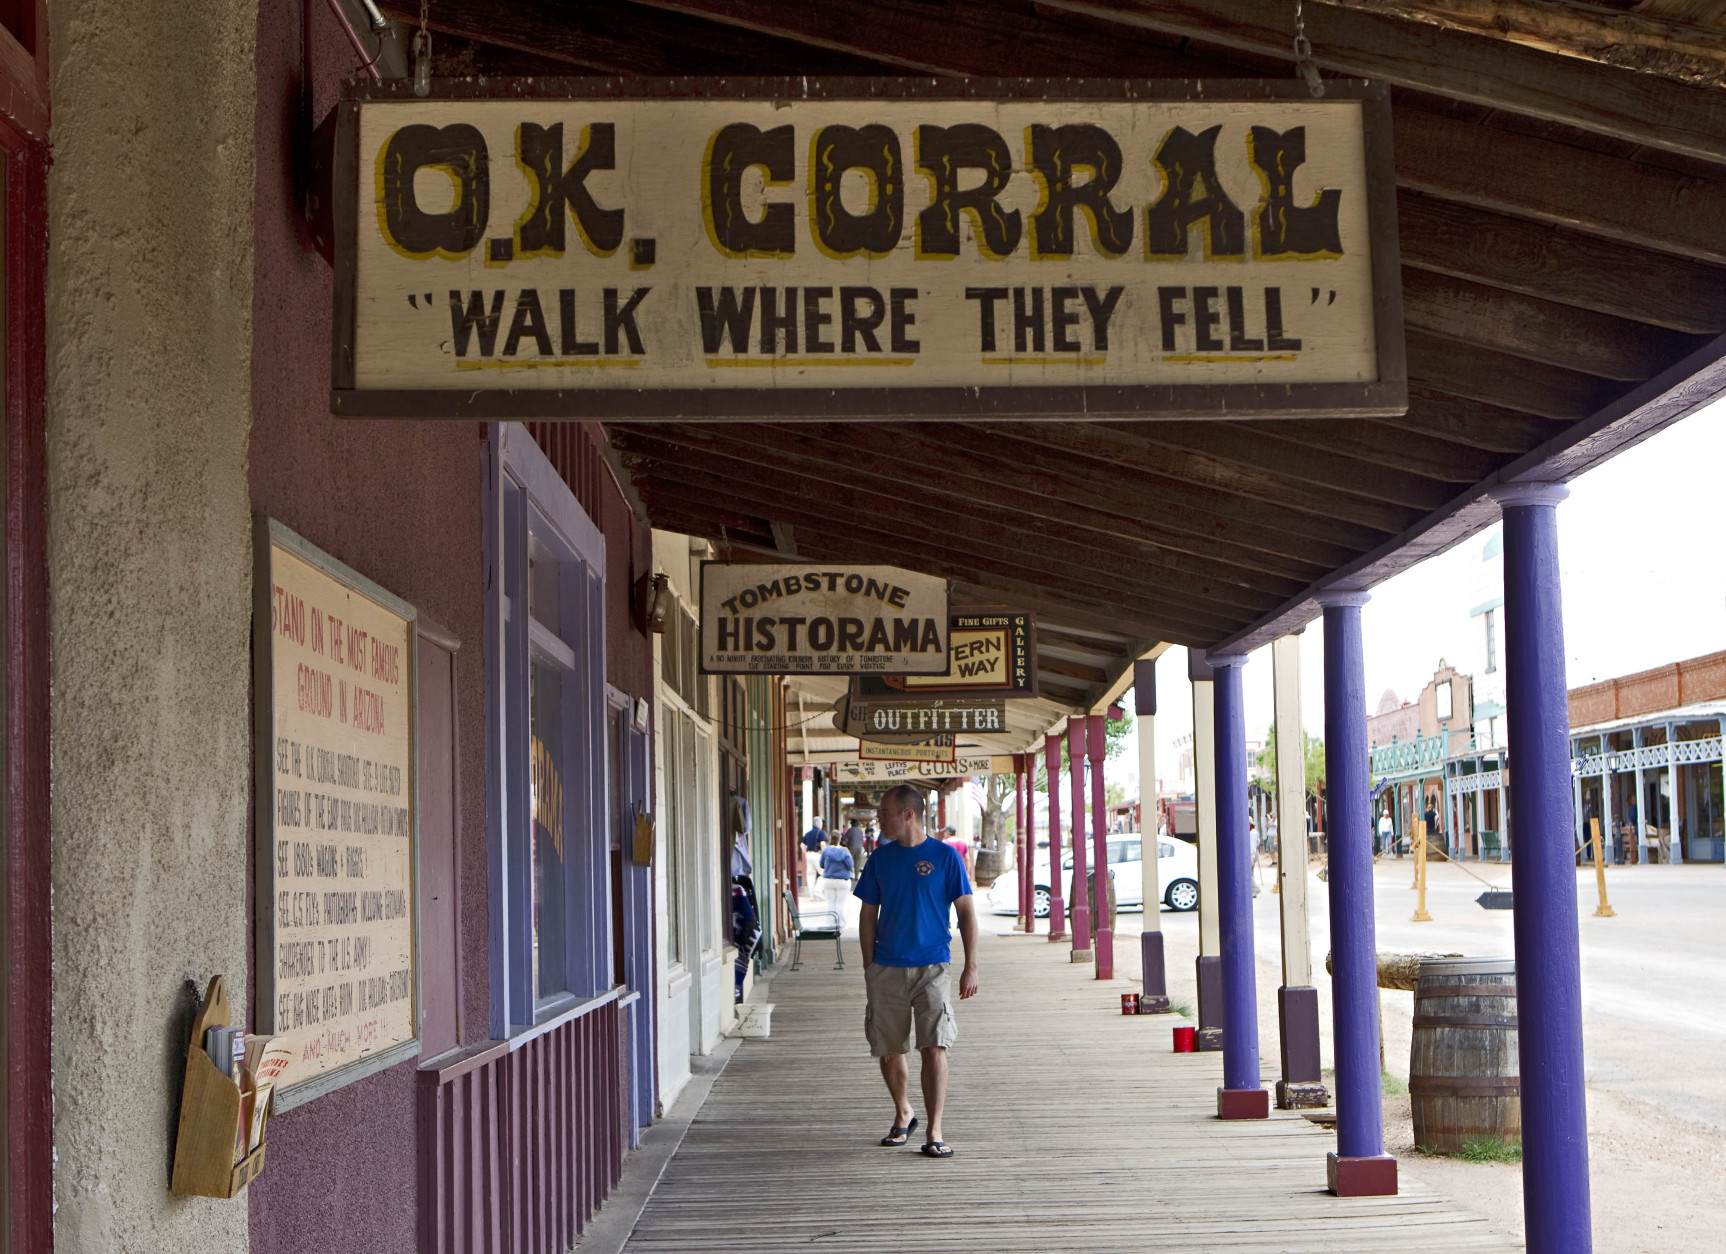 The rear entrance to the O.K. Corral is shown Wednesday, April 21, 2010 in Tombstone, Ariz.  A box of original court transcripts from the 1881 Coroner's Inquest in the Gunfight at the OK Corral were handed over to the Arizona State Archives in Phoenix earlier Wednesday. The 36-page hand-written account of witness testimony given after the shootout that left three men dead in Tombstone had been missing for years, until found by court clerks Garcia and Cook as they were cleaning out storage space at the Bisbee, Ariz., courthouse in March.  (AP Photo/Matt York)